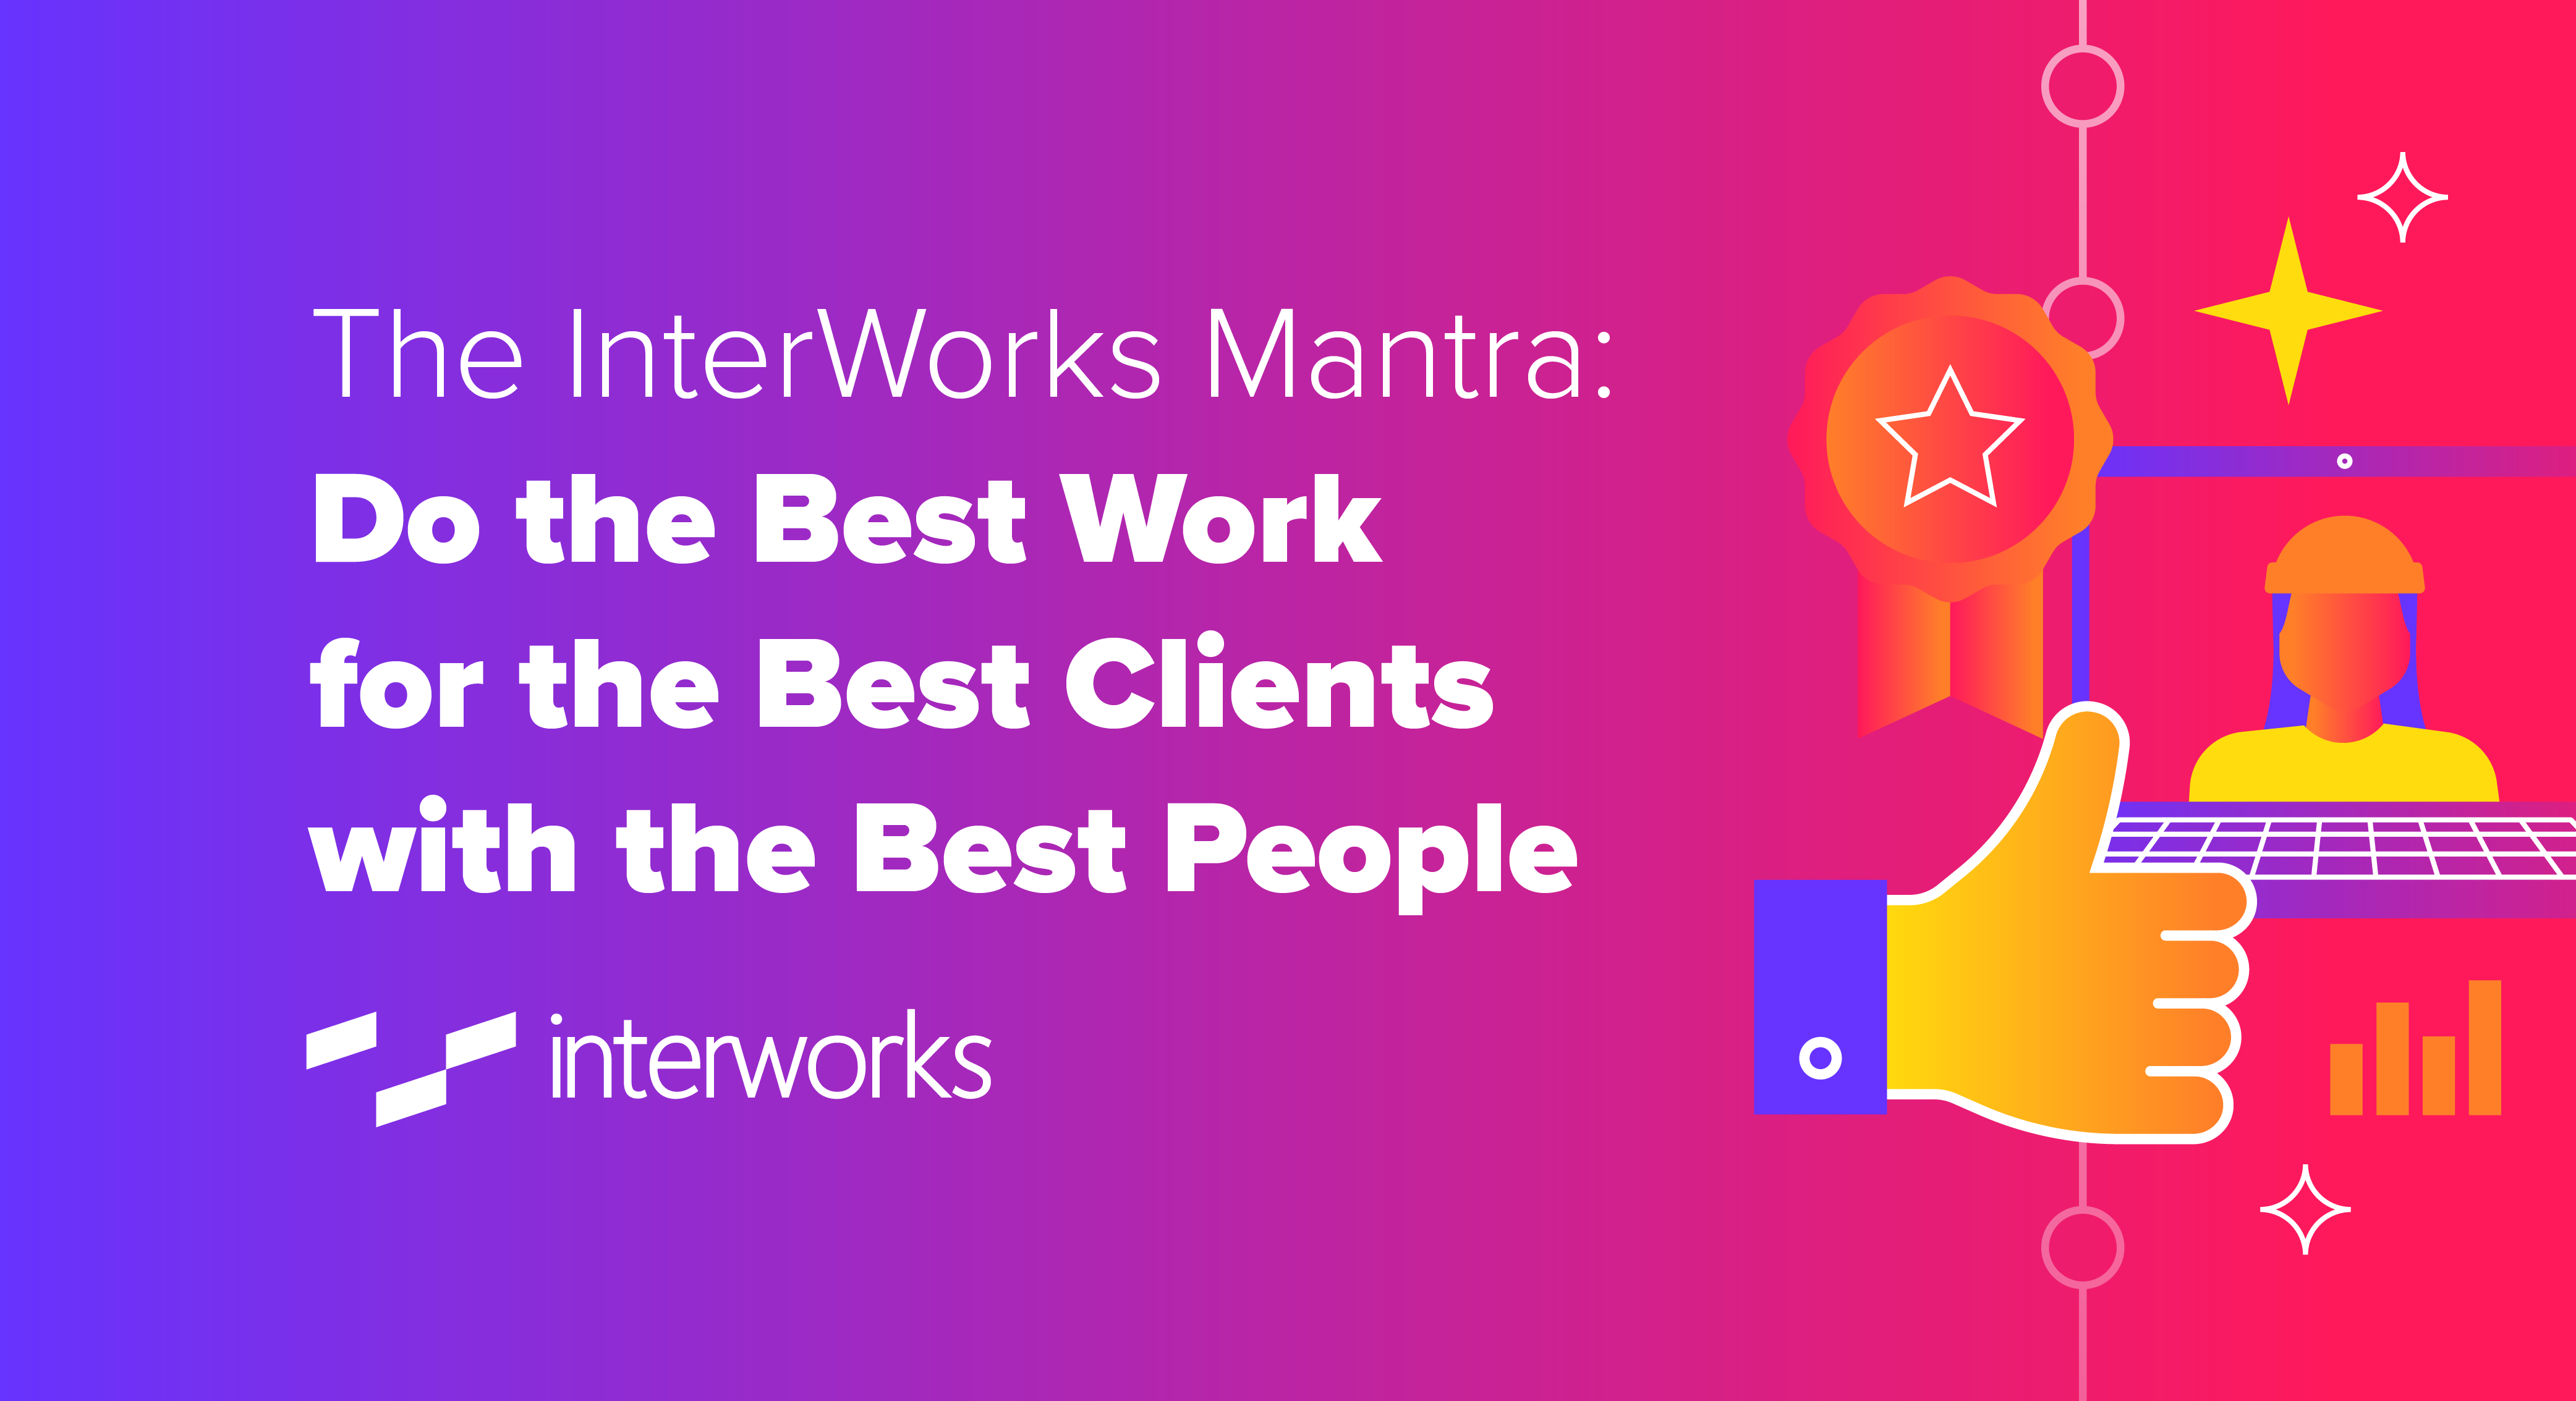 Do the Best Work for the Best Clients with the Best People